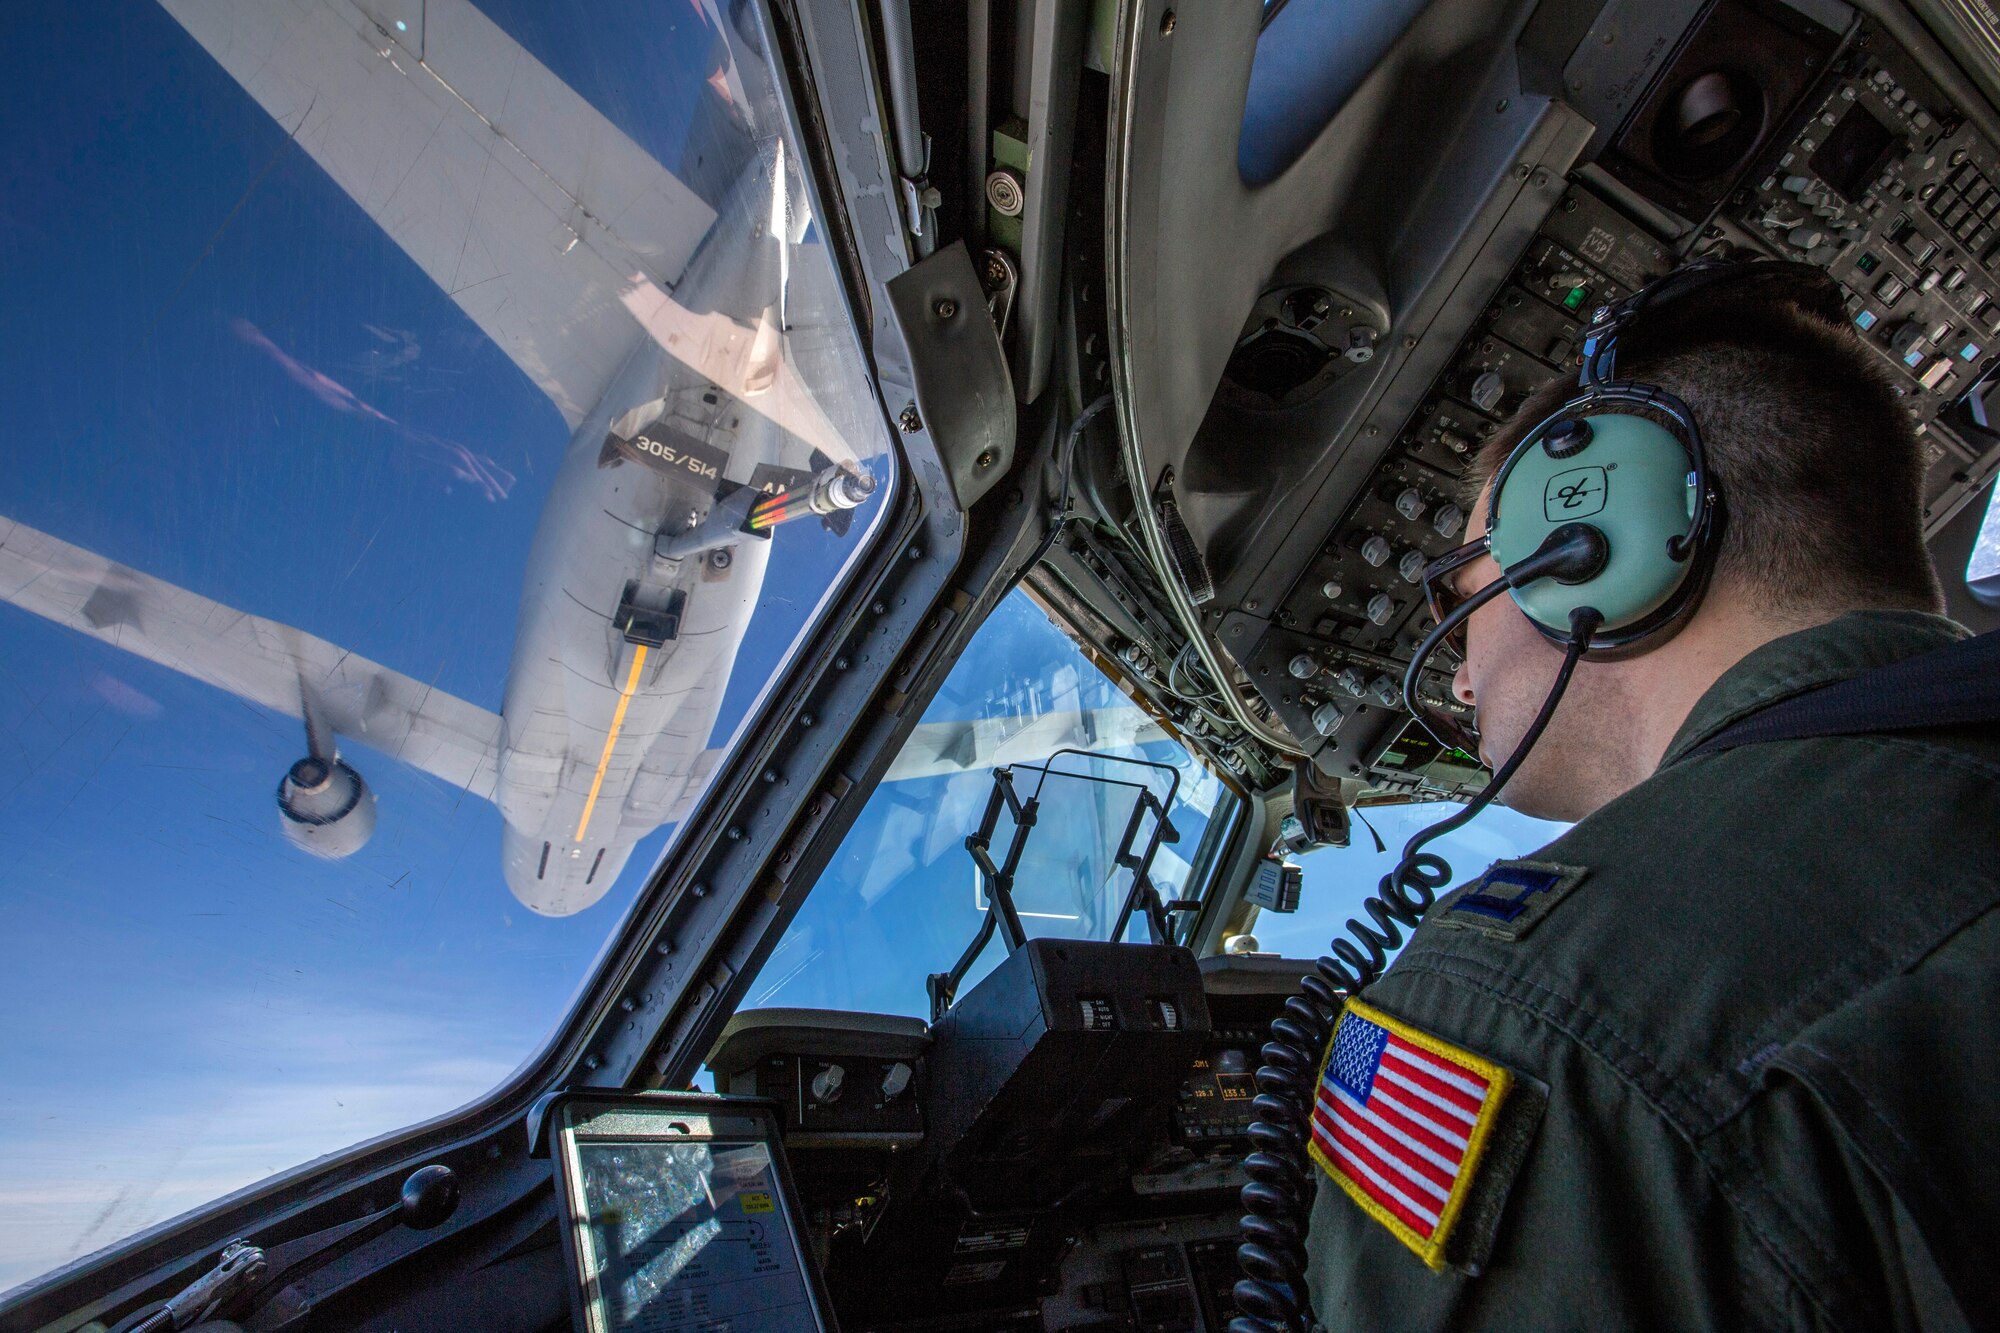 Capt. Thomas Beltz, C-17 Globemaster III pilot with the 514th Air Mobility Wing, closes in to refuel with a KC-10 Extender over the Atlantic Ocean, Feb. 10, 2018. The 514th AMW is an Air Force Reserve Command unit located at Joint Base McGuire-Dix-Lakehurst. (U.S. Air Force photo by Master Sgt. Mark C. Olsen)